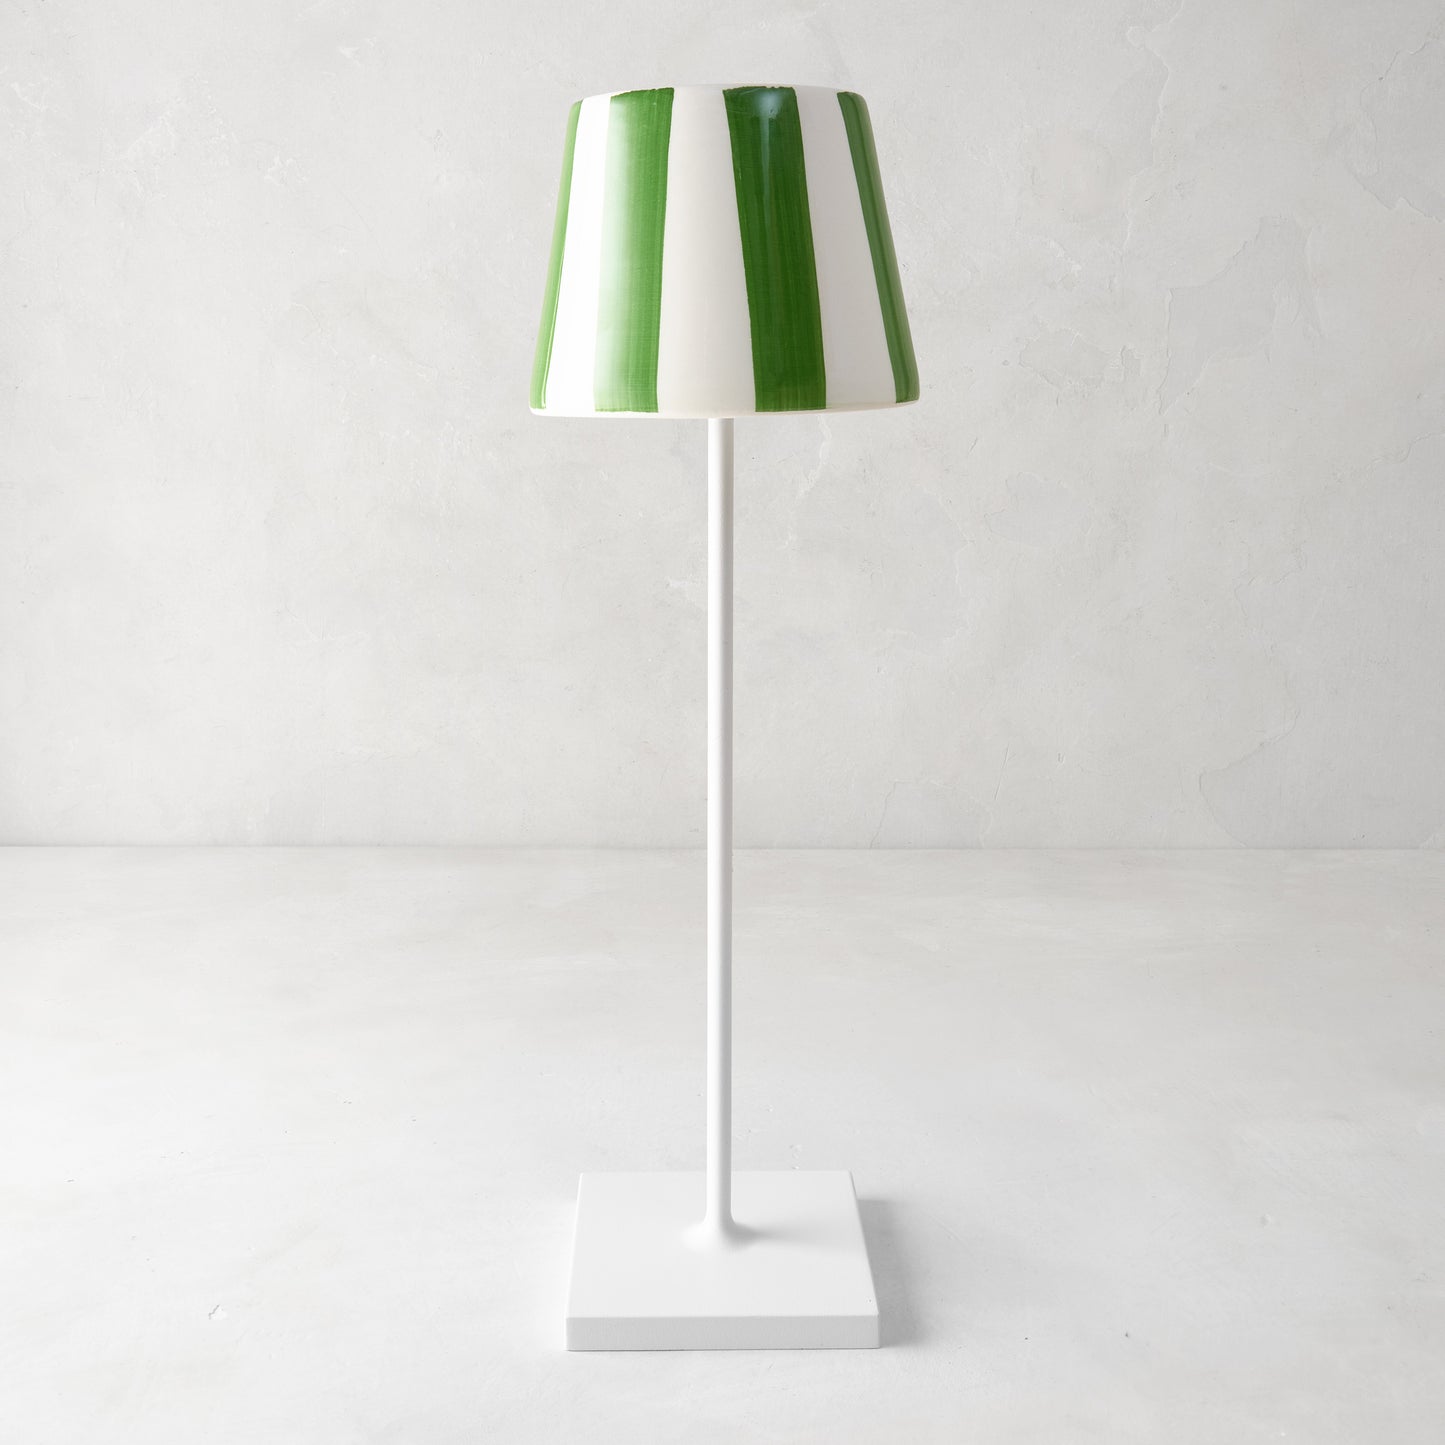 Green Striped Removable Ceramic Lamp Shade